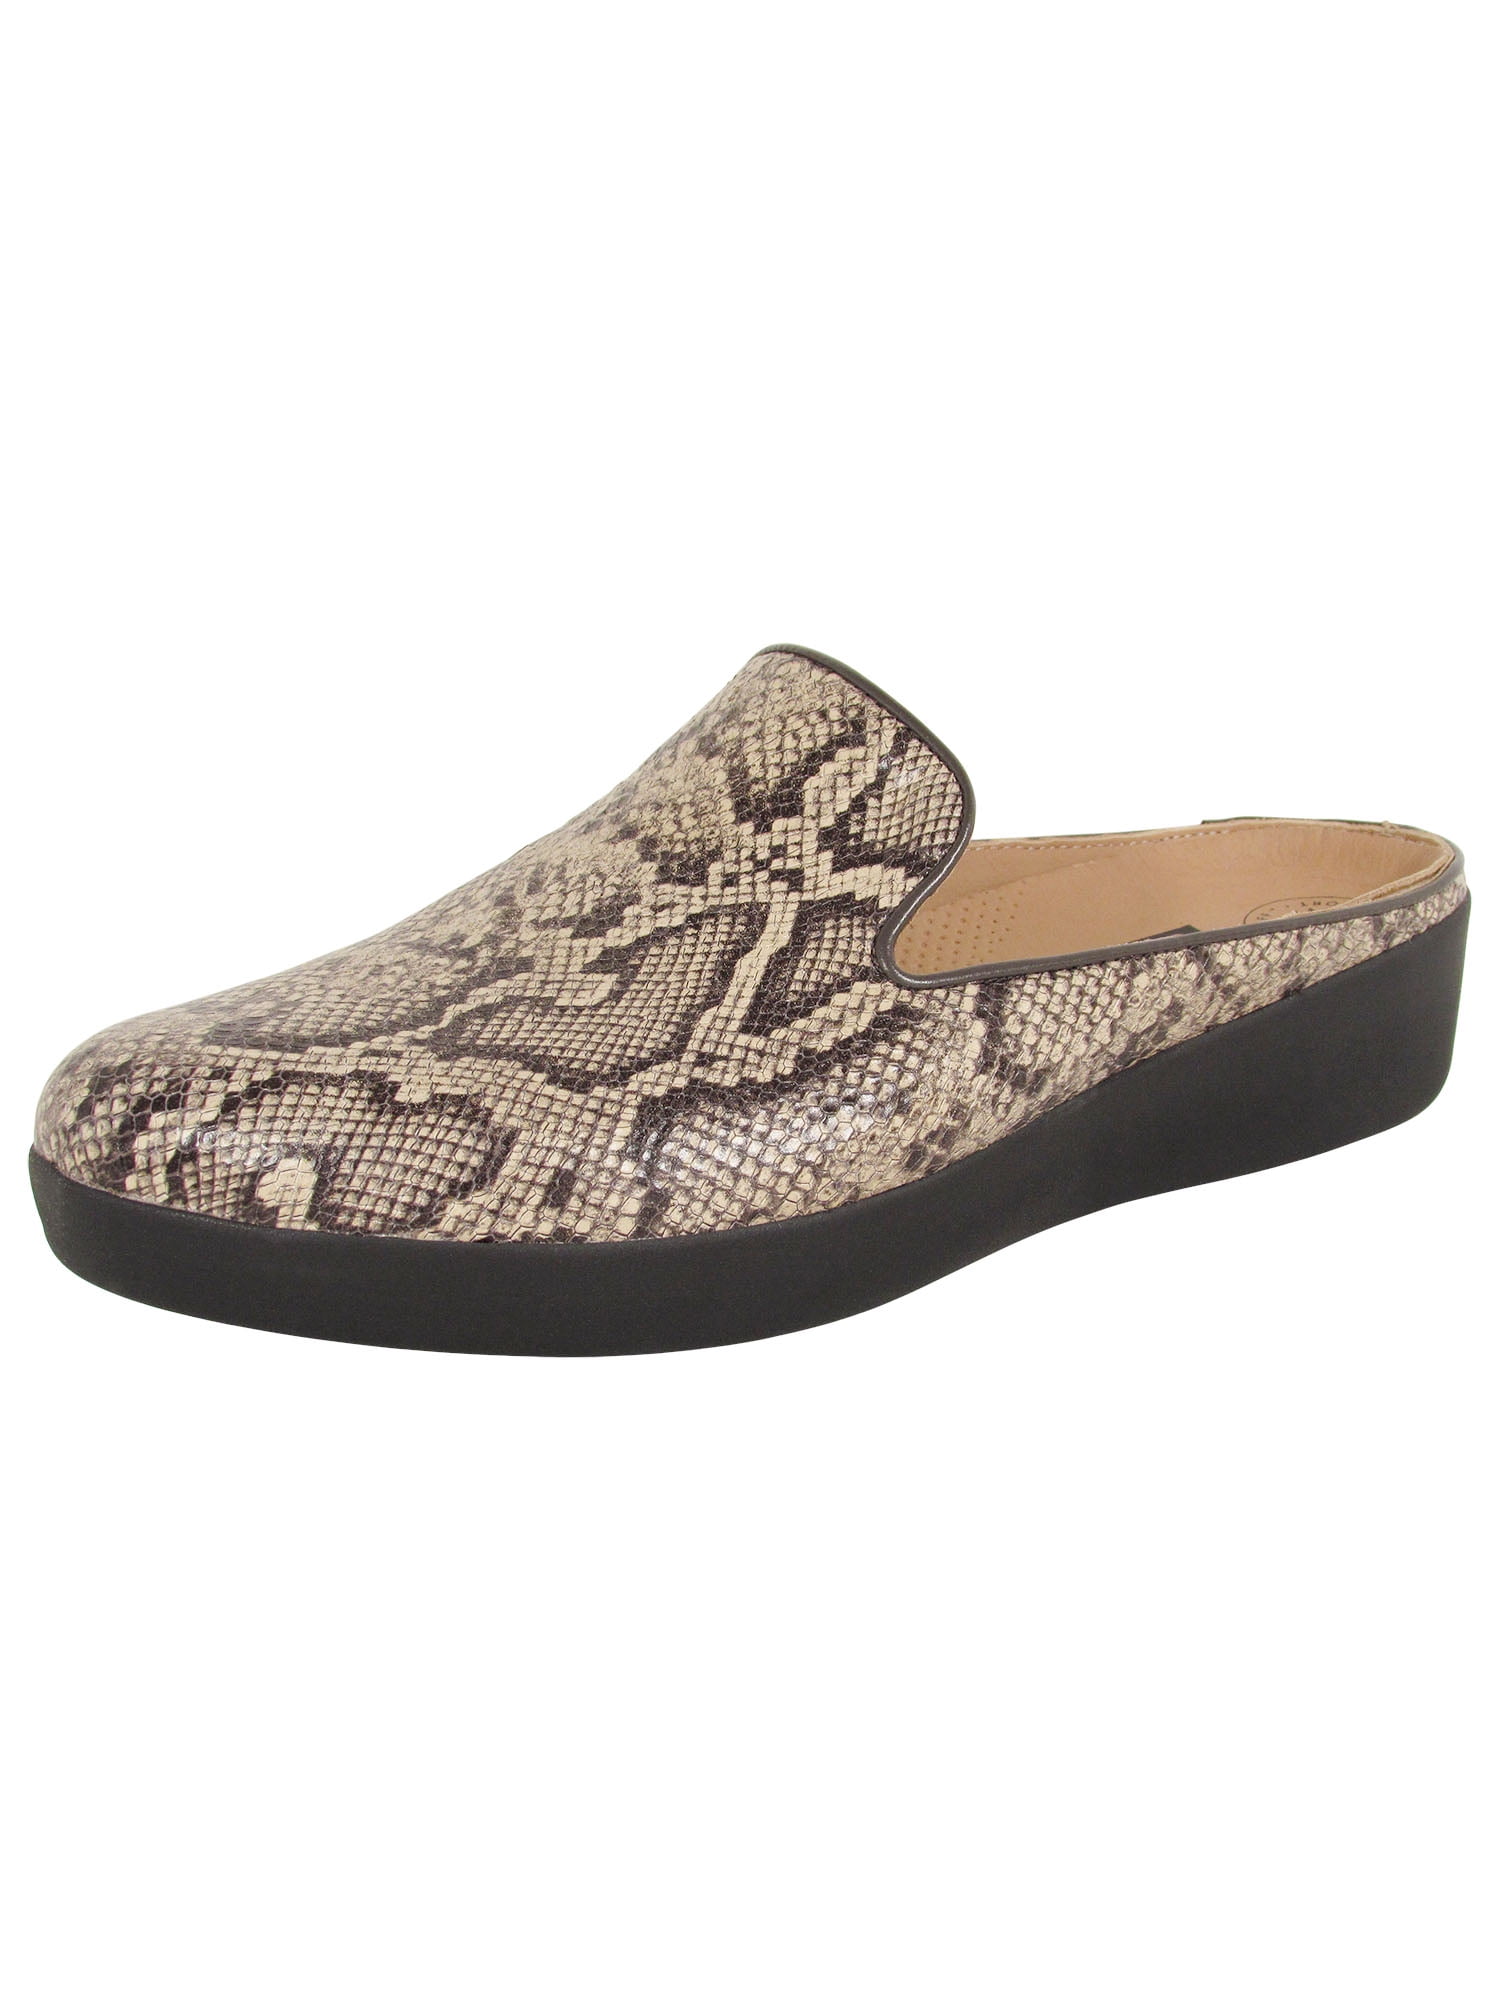 Fitflop Womens Superskate Leather Slip On Mule Shoes, Taupe Snake, US 7